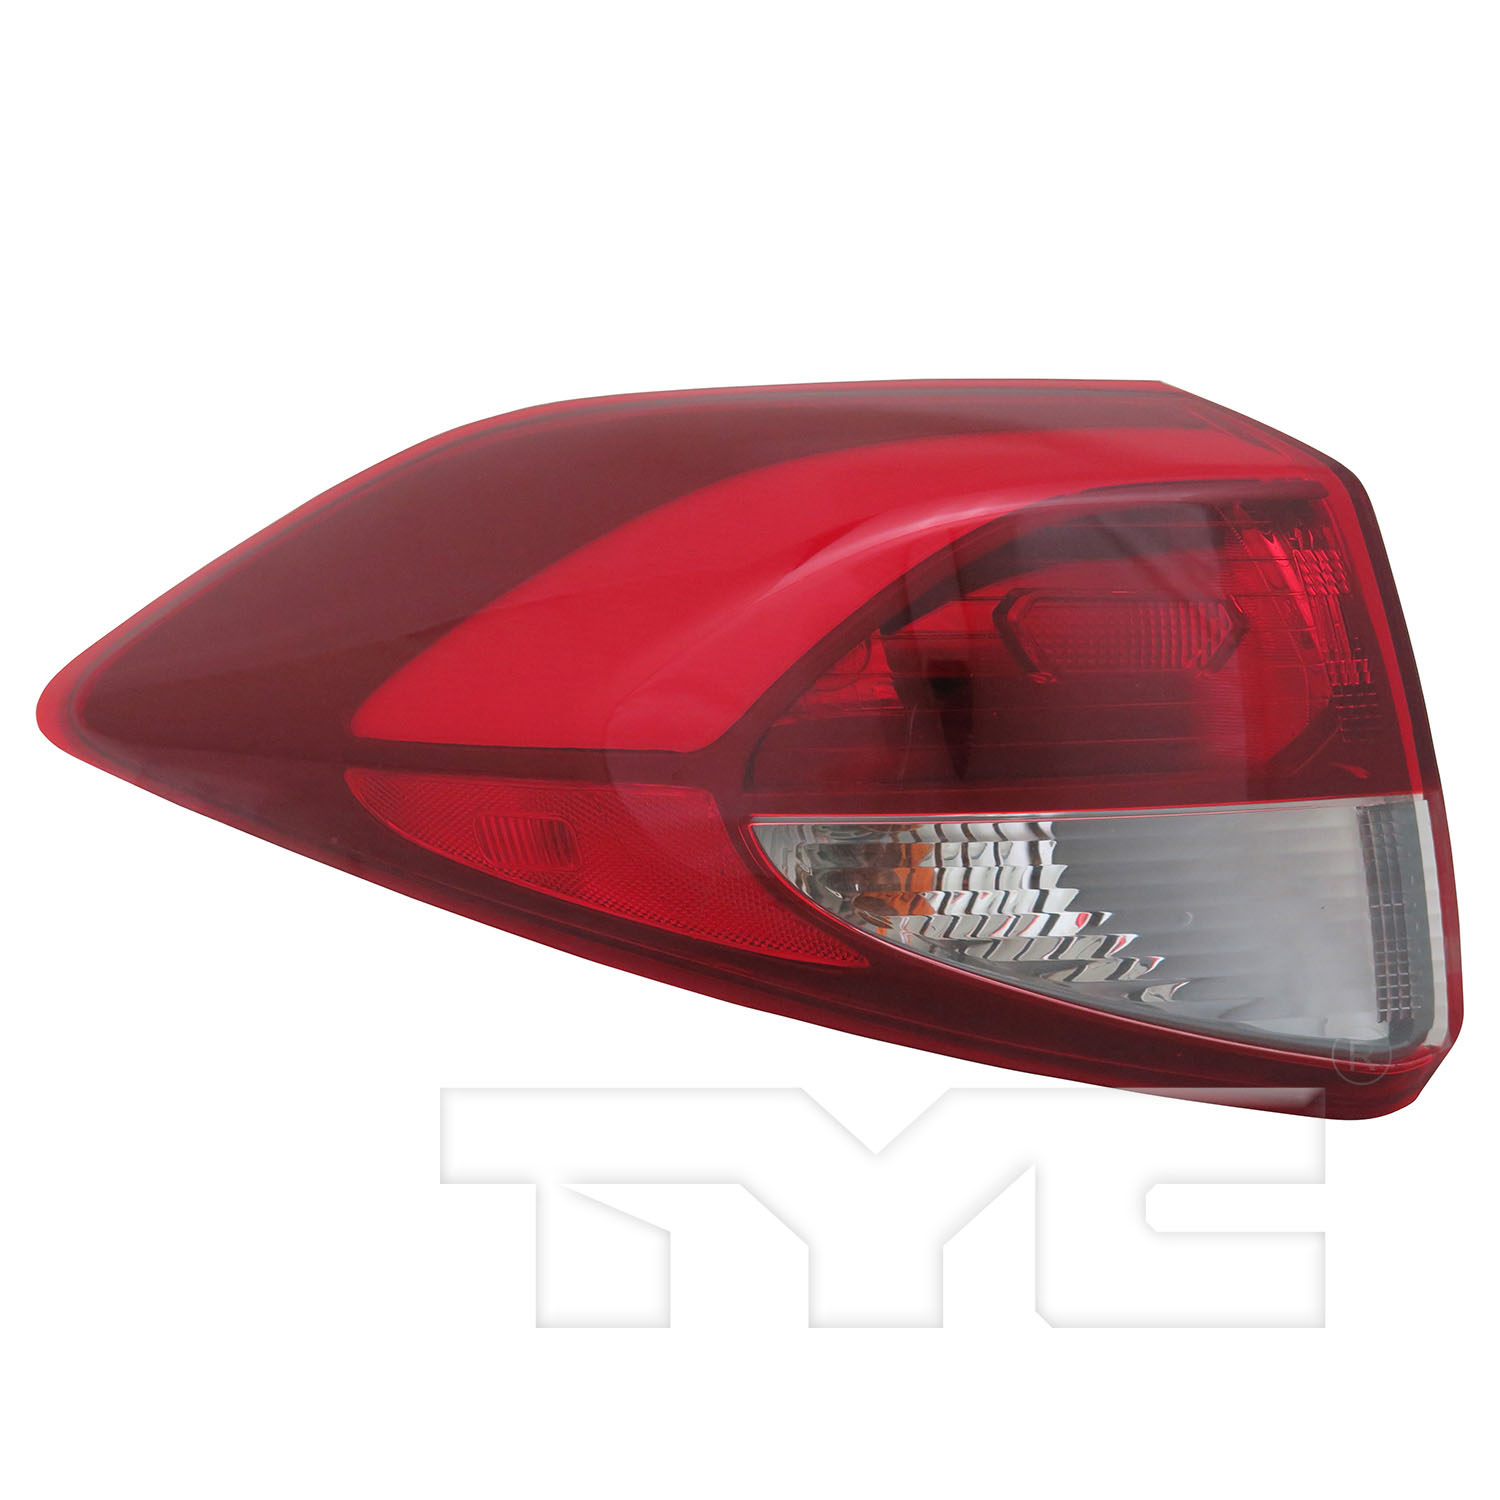 Aftermarket TAILLIGHTS for HYUNDAI - TUCSON, TUCSON,16-18,LT Taillamp assy outer